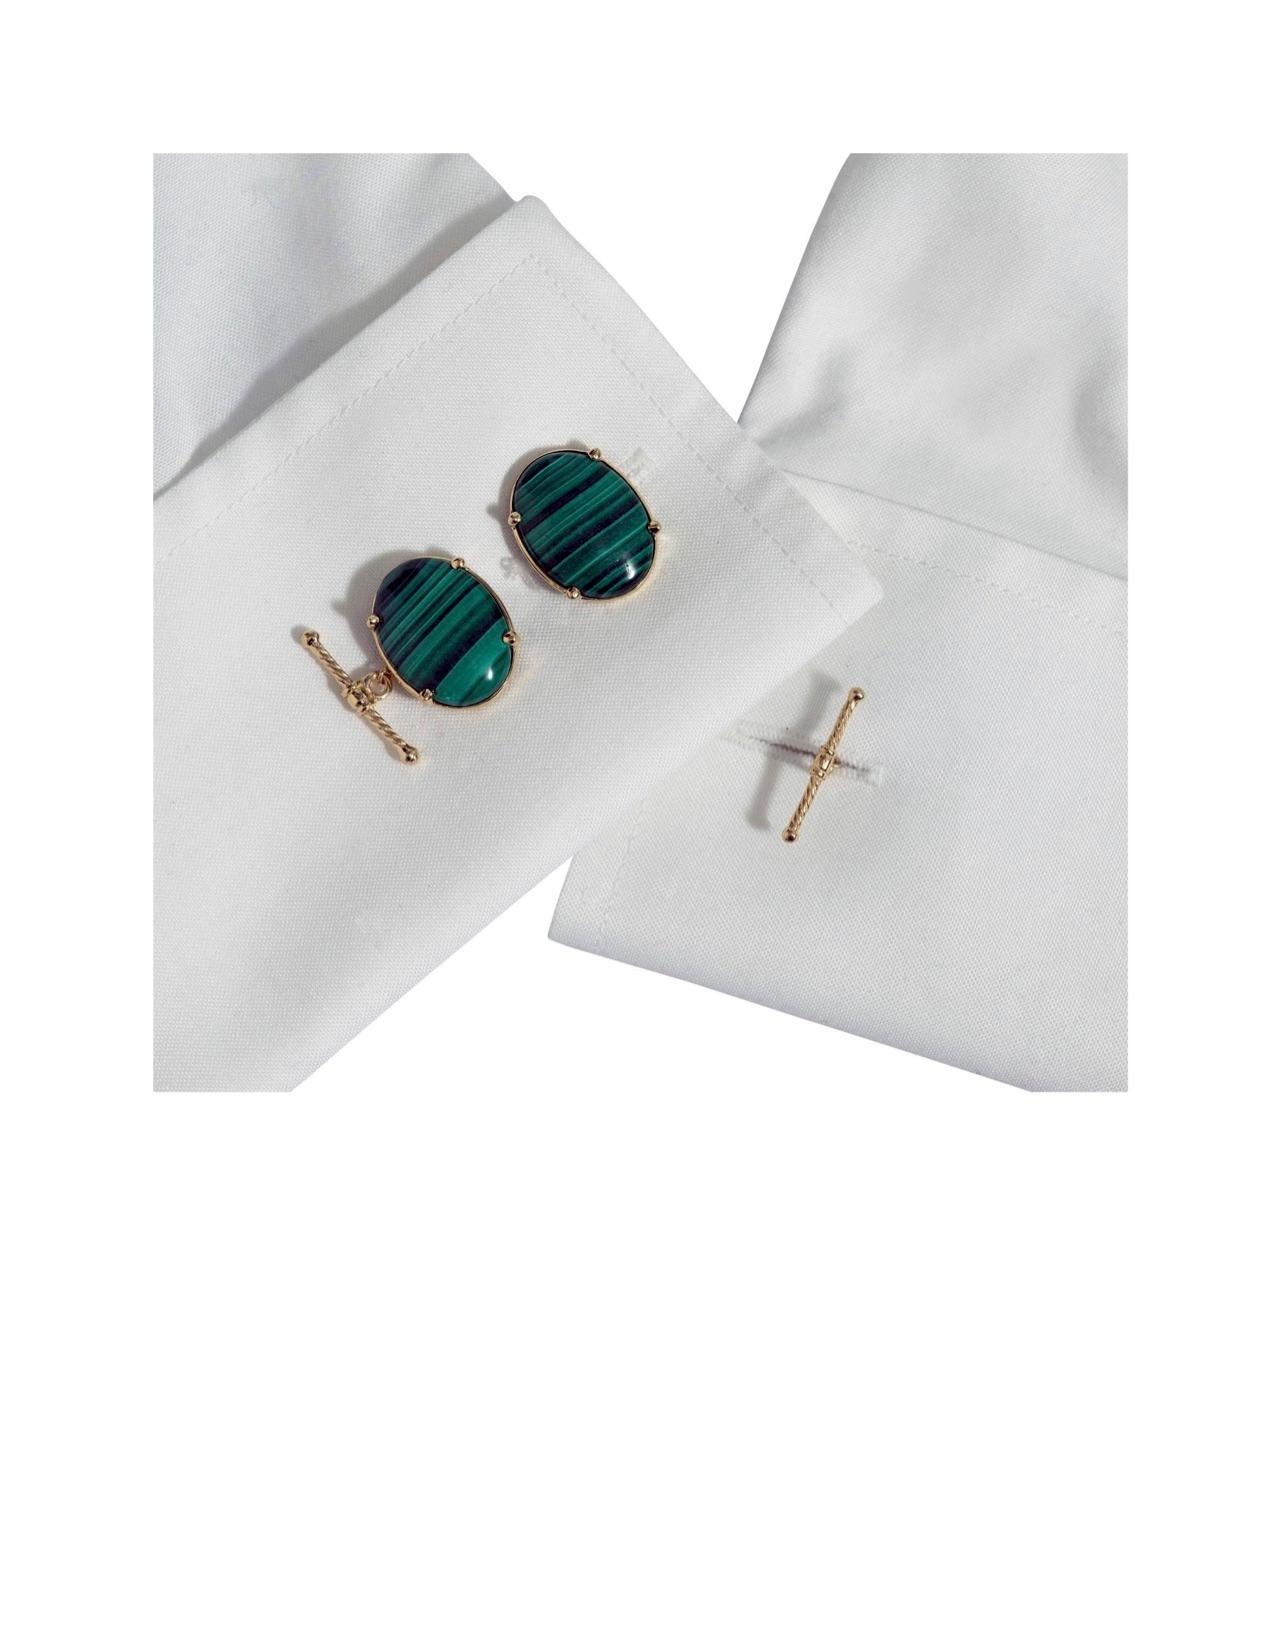 These striking cufflinks, designed to be worn with a French cuff shirt by either a man or a woman, are shown set in 14K yellow gold and feature a chain and solid gold T-bar.  The T-bar is a signature Dudley VanDyke design.  The Malachite is 15 x 20